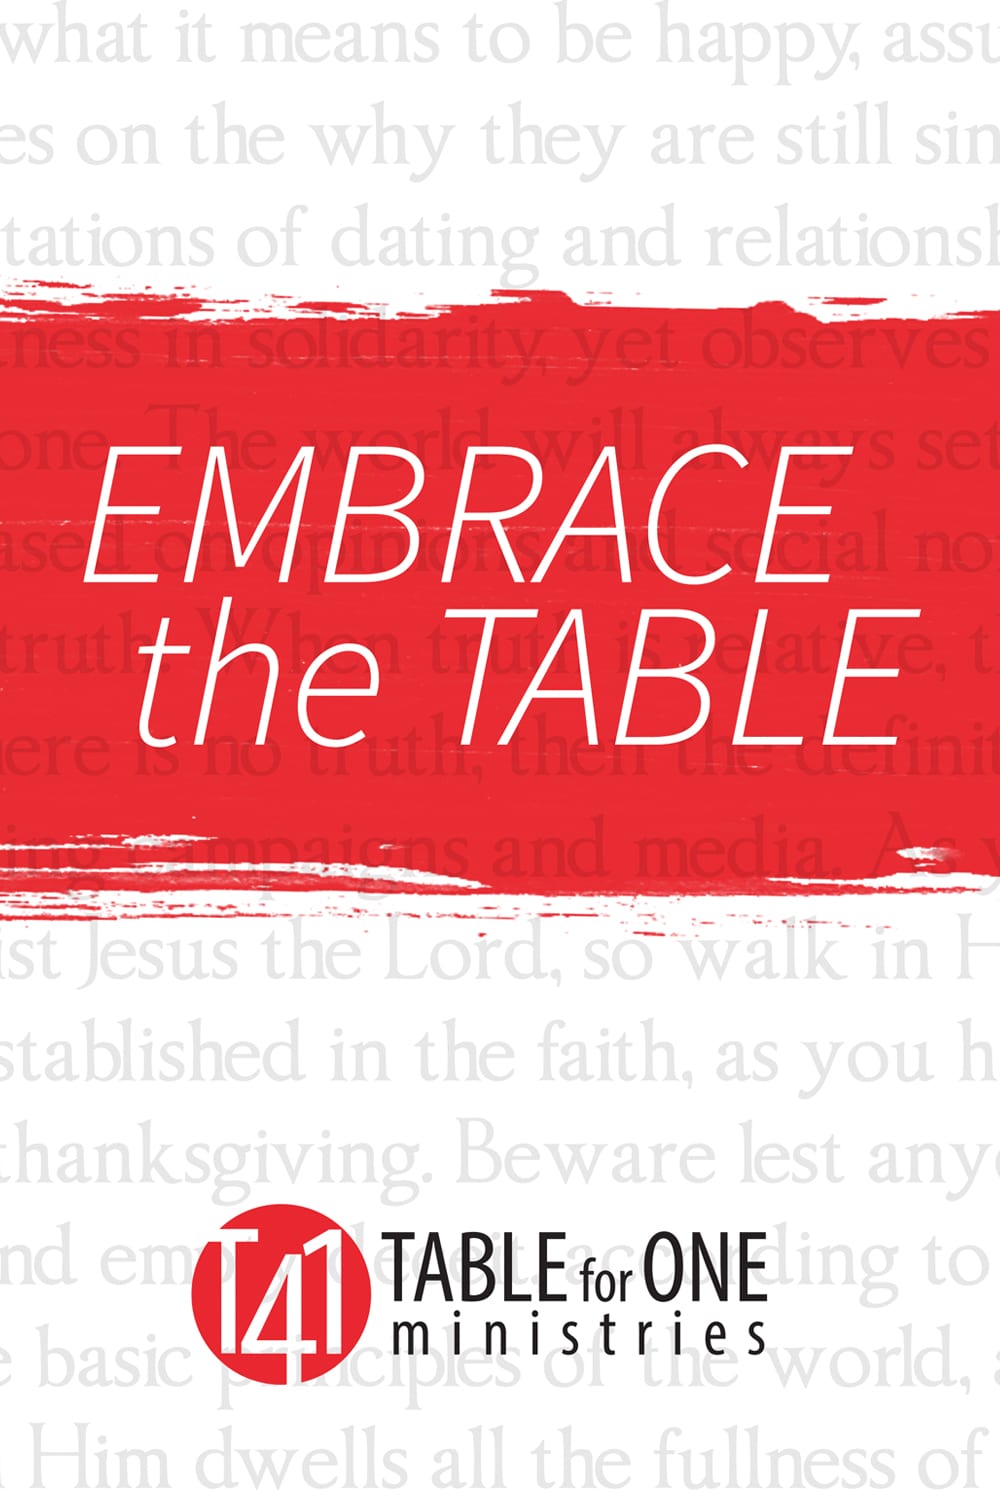 Table for One Ministries - Ministry for Singles and Leaders to Singles - Logo - Be Complete In Christ - singles ministry resources - single adults ministry resources - Single adult bible study - single adult bible studies